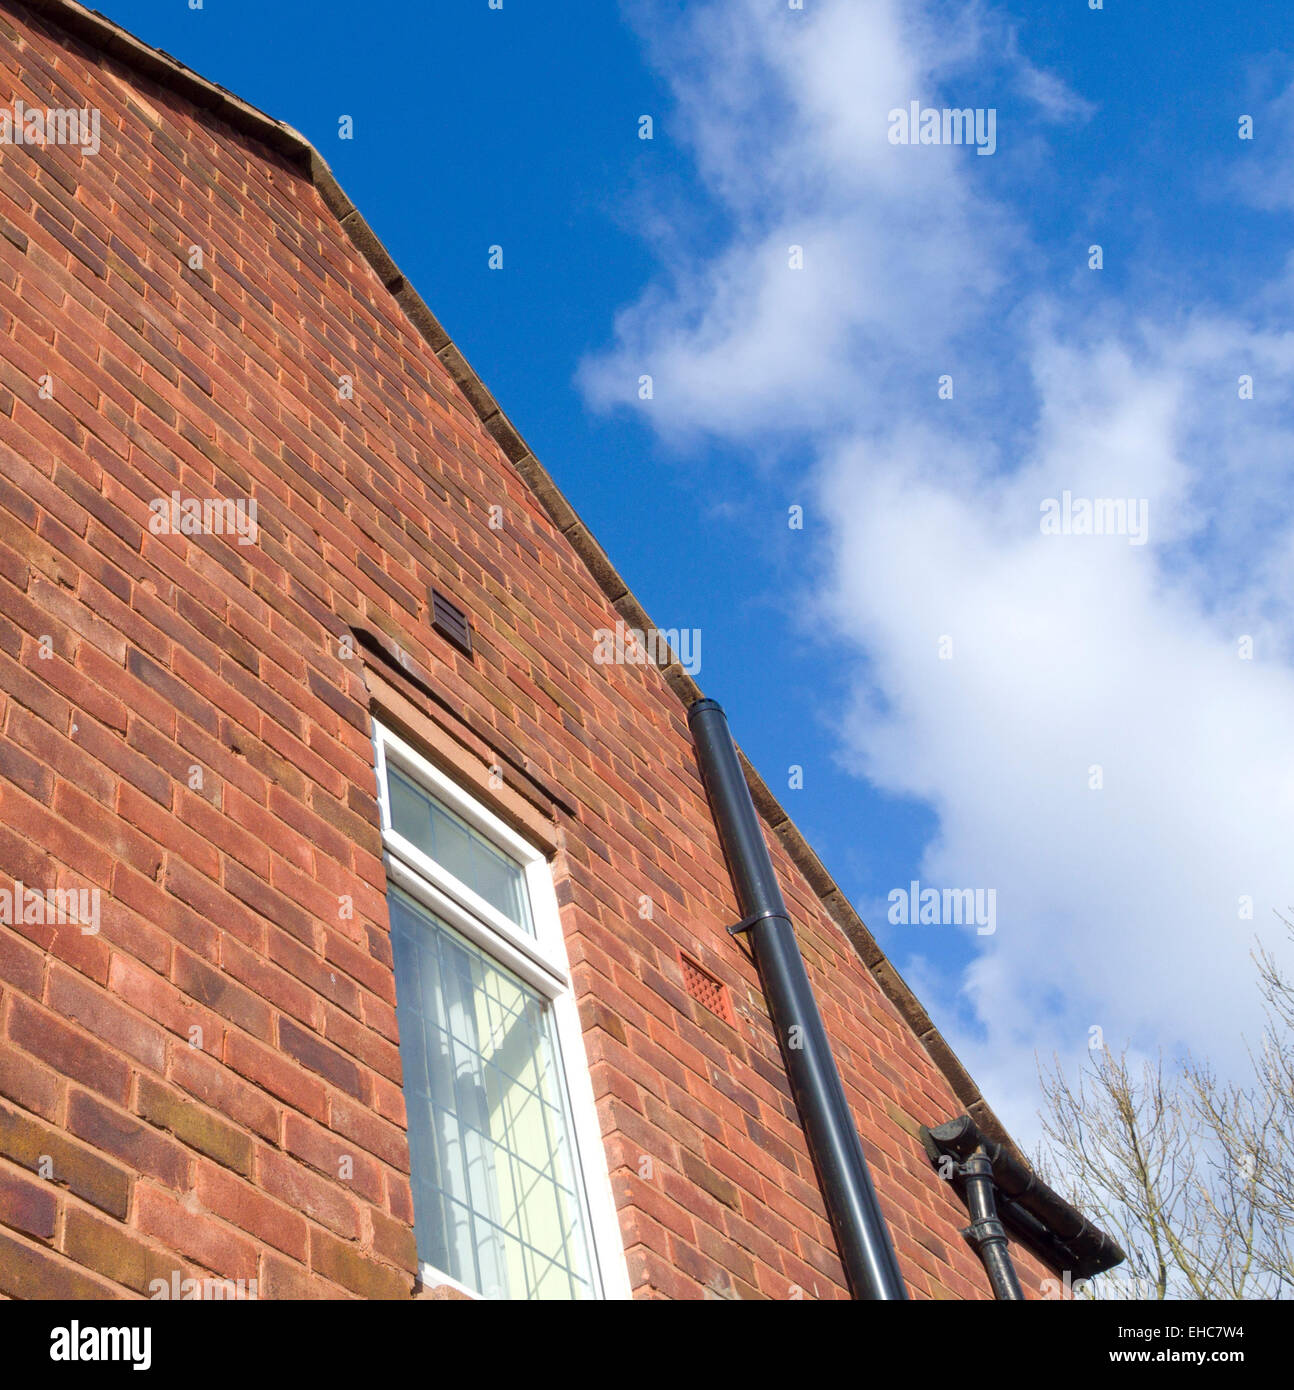 Gable End of a House With External Soil Pipe, UK PROPERTY RELEASED Stock Photo